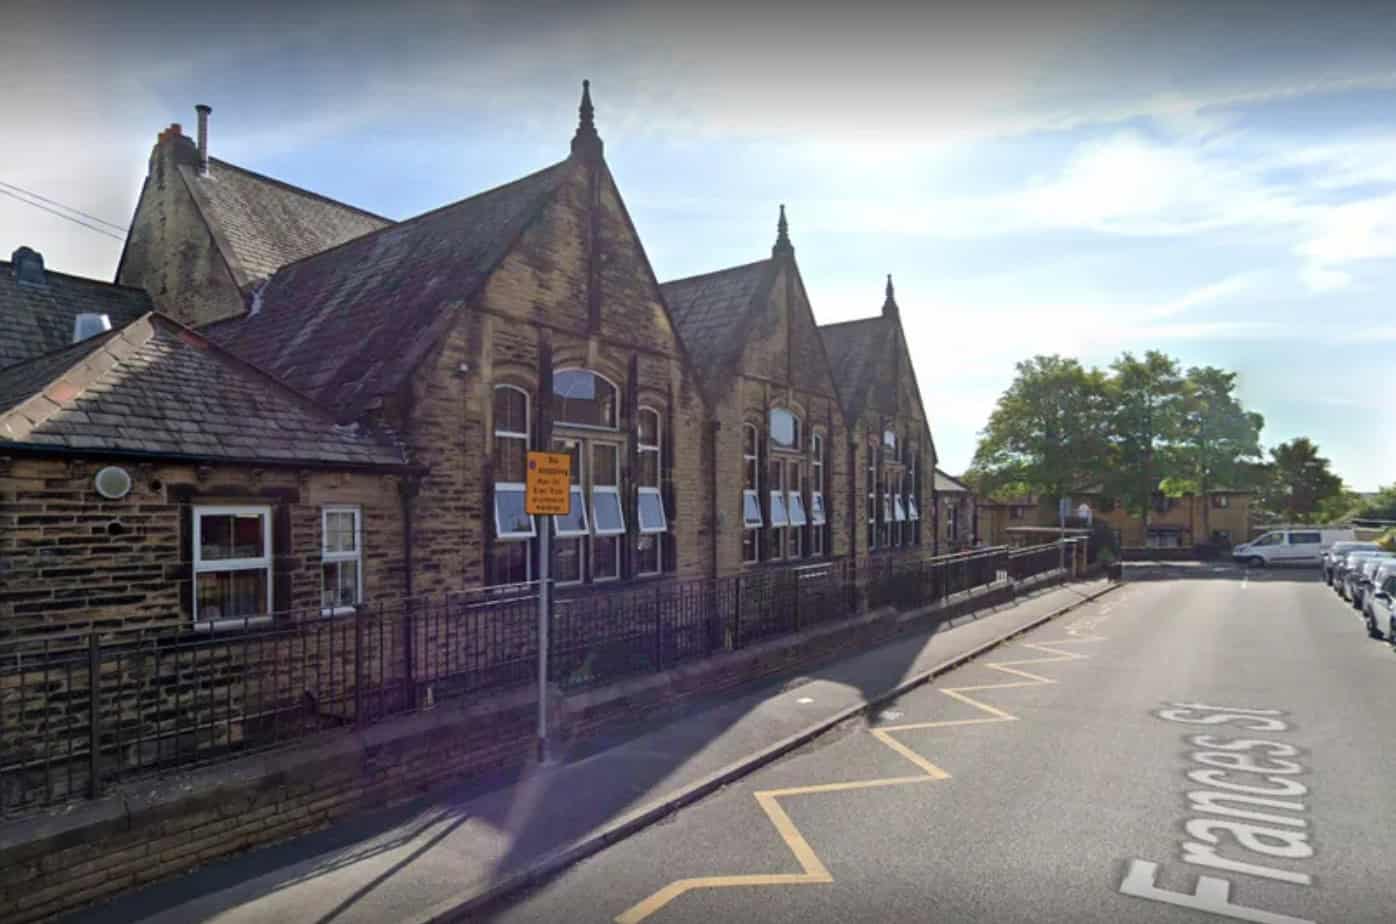 Farsley school appeals for new governors - West Leeds Dispatch